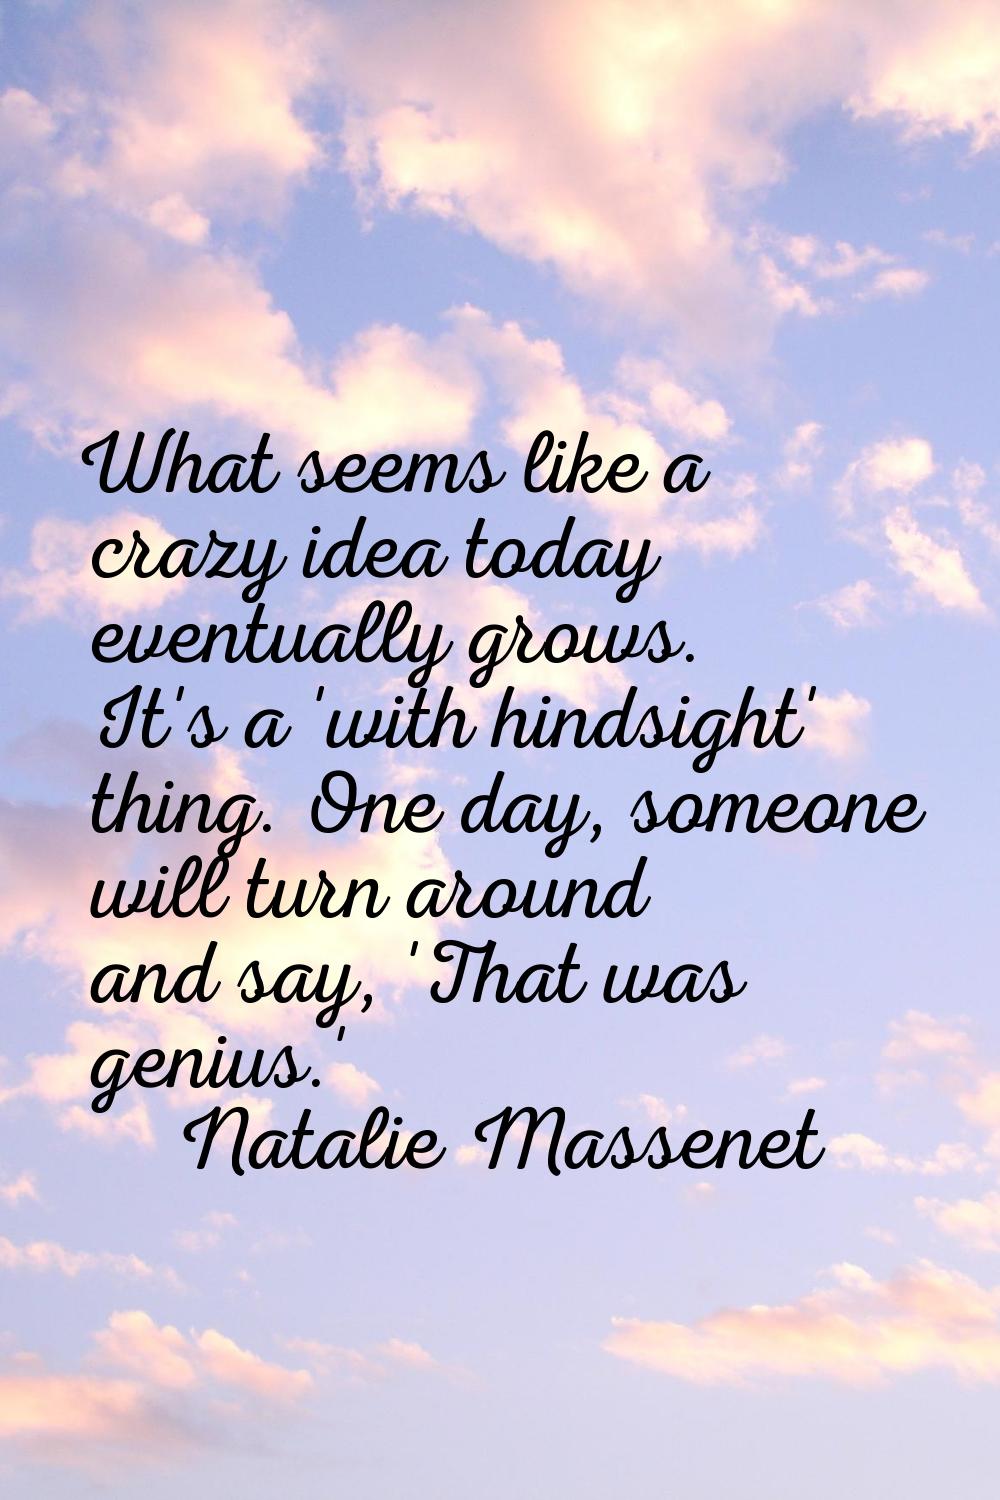 What seems like a crazy idea today eventually grows. It's a 'with hindsight' thing. One day, someon